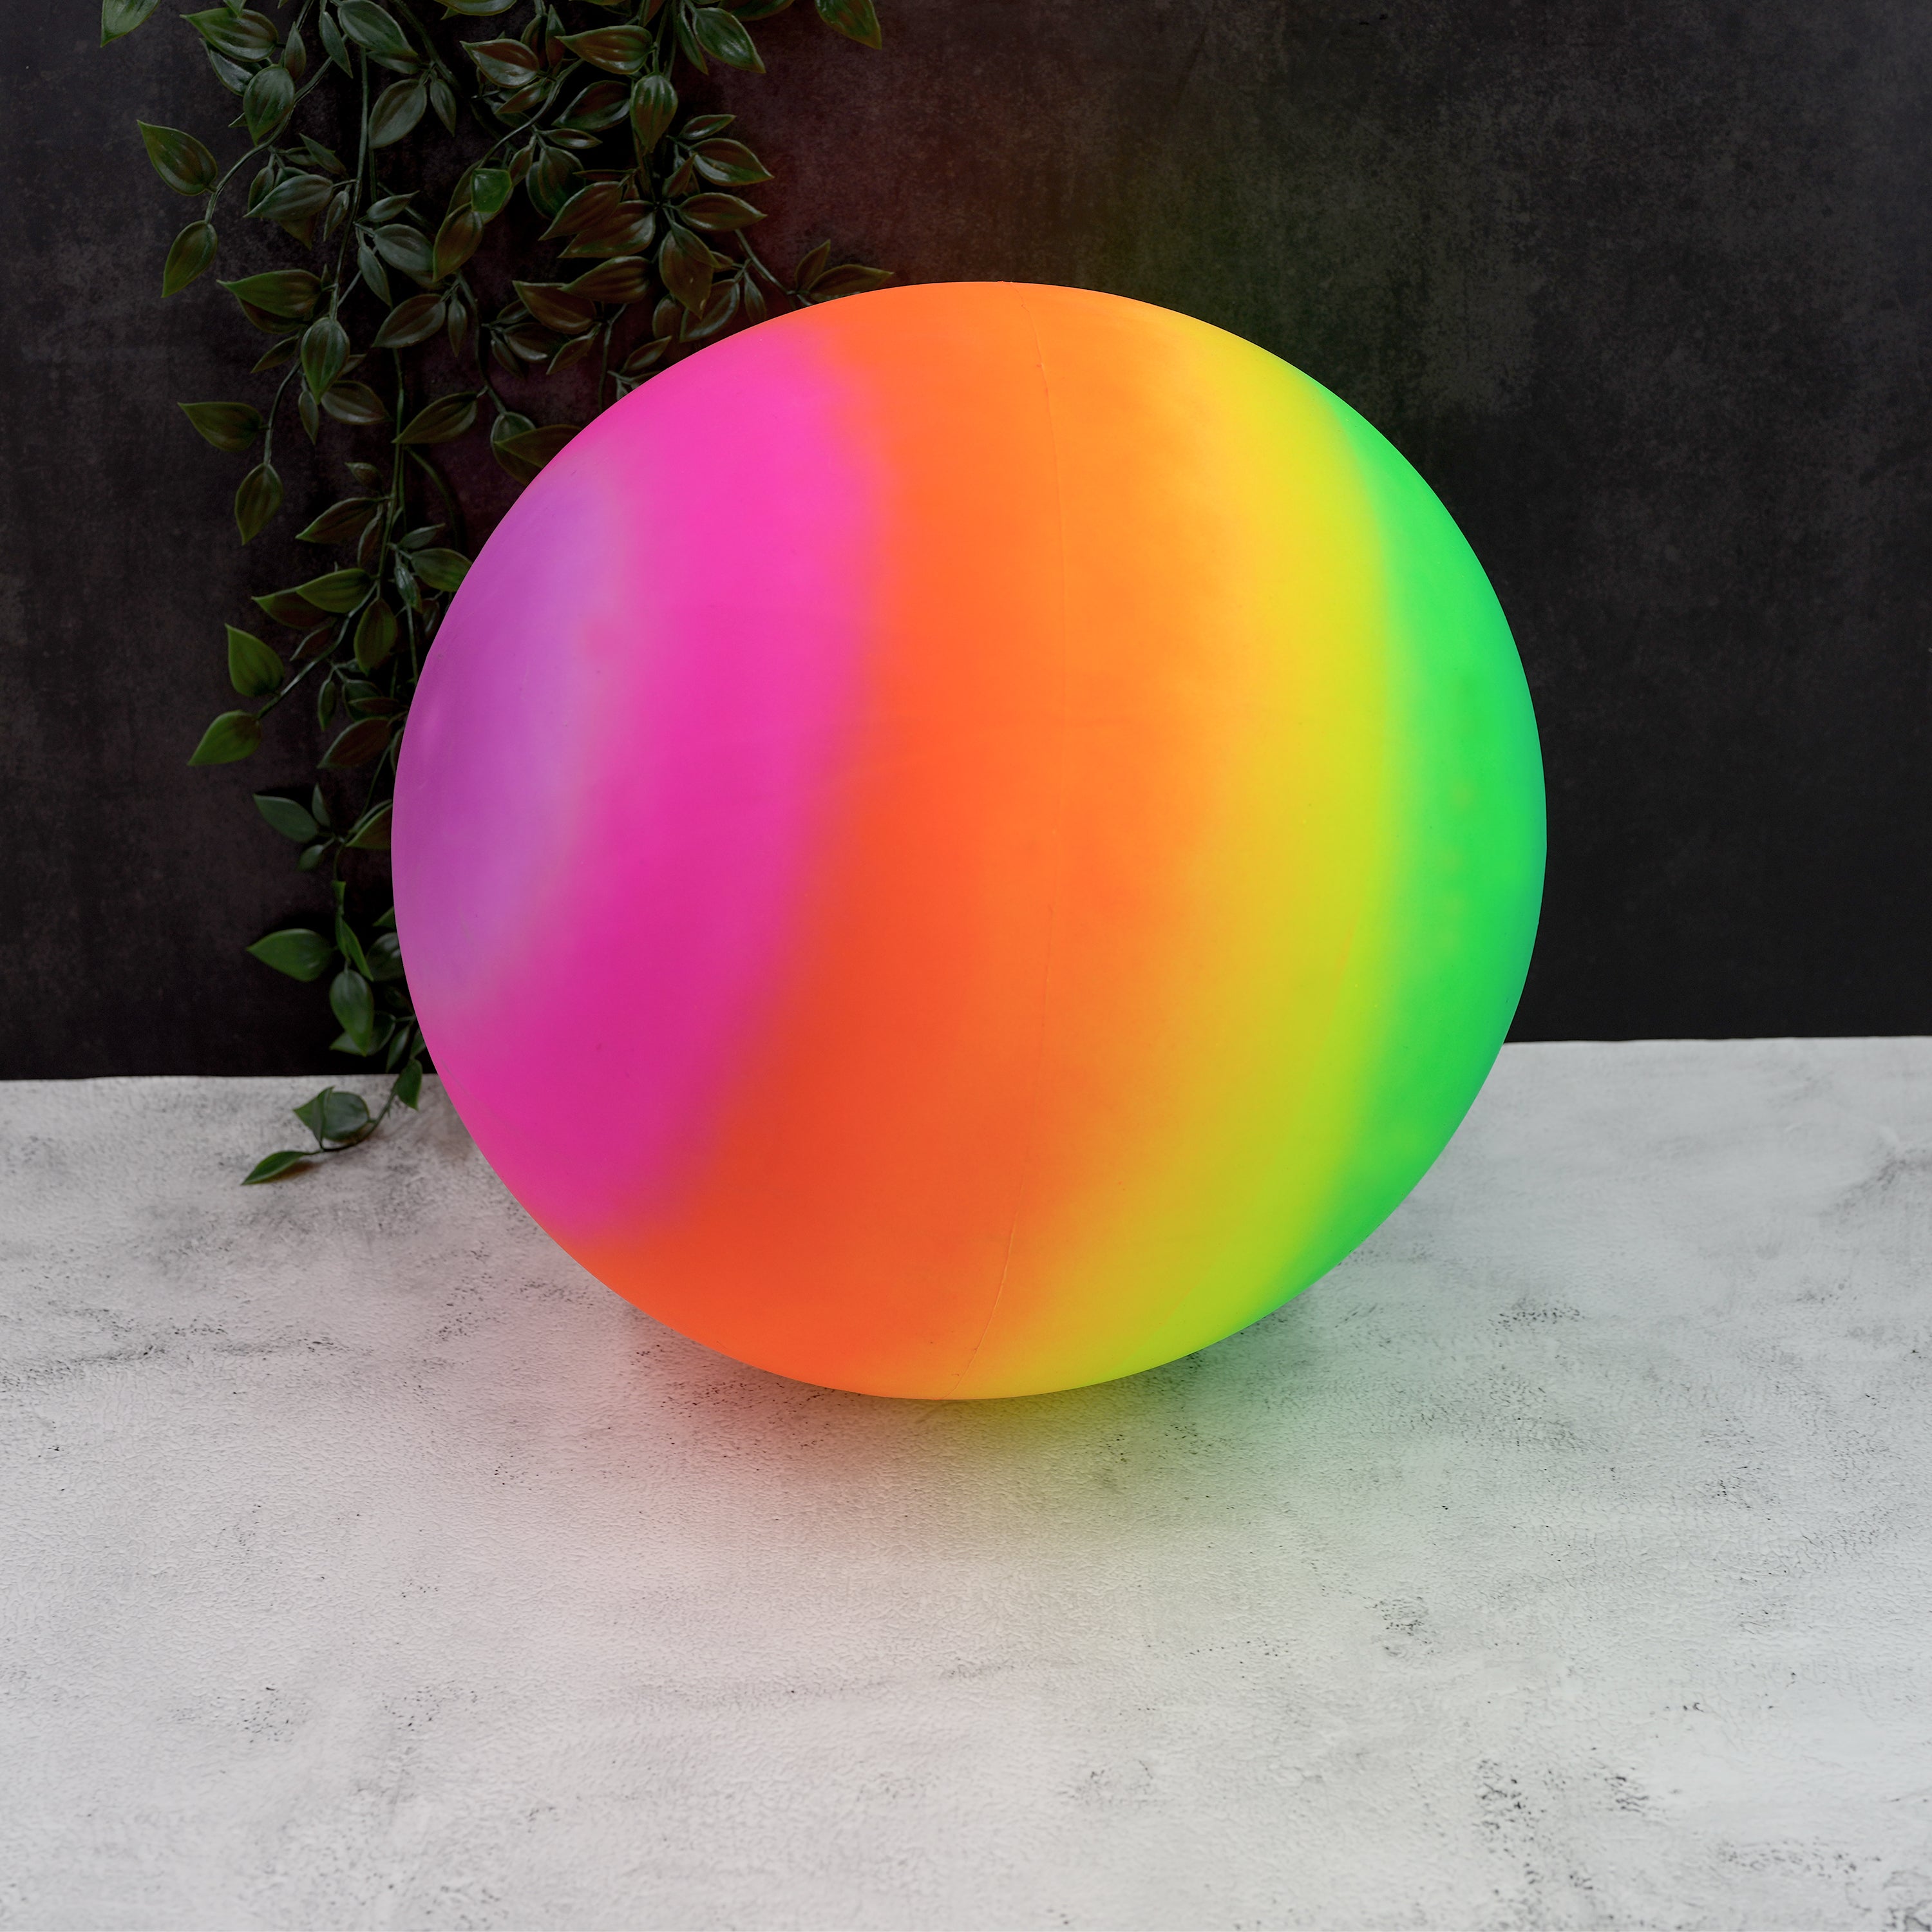 Giant Neon Rainbow Ball The Magic Toy Shop - The Magic Toy Shop